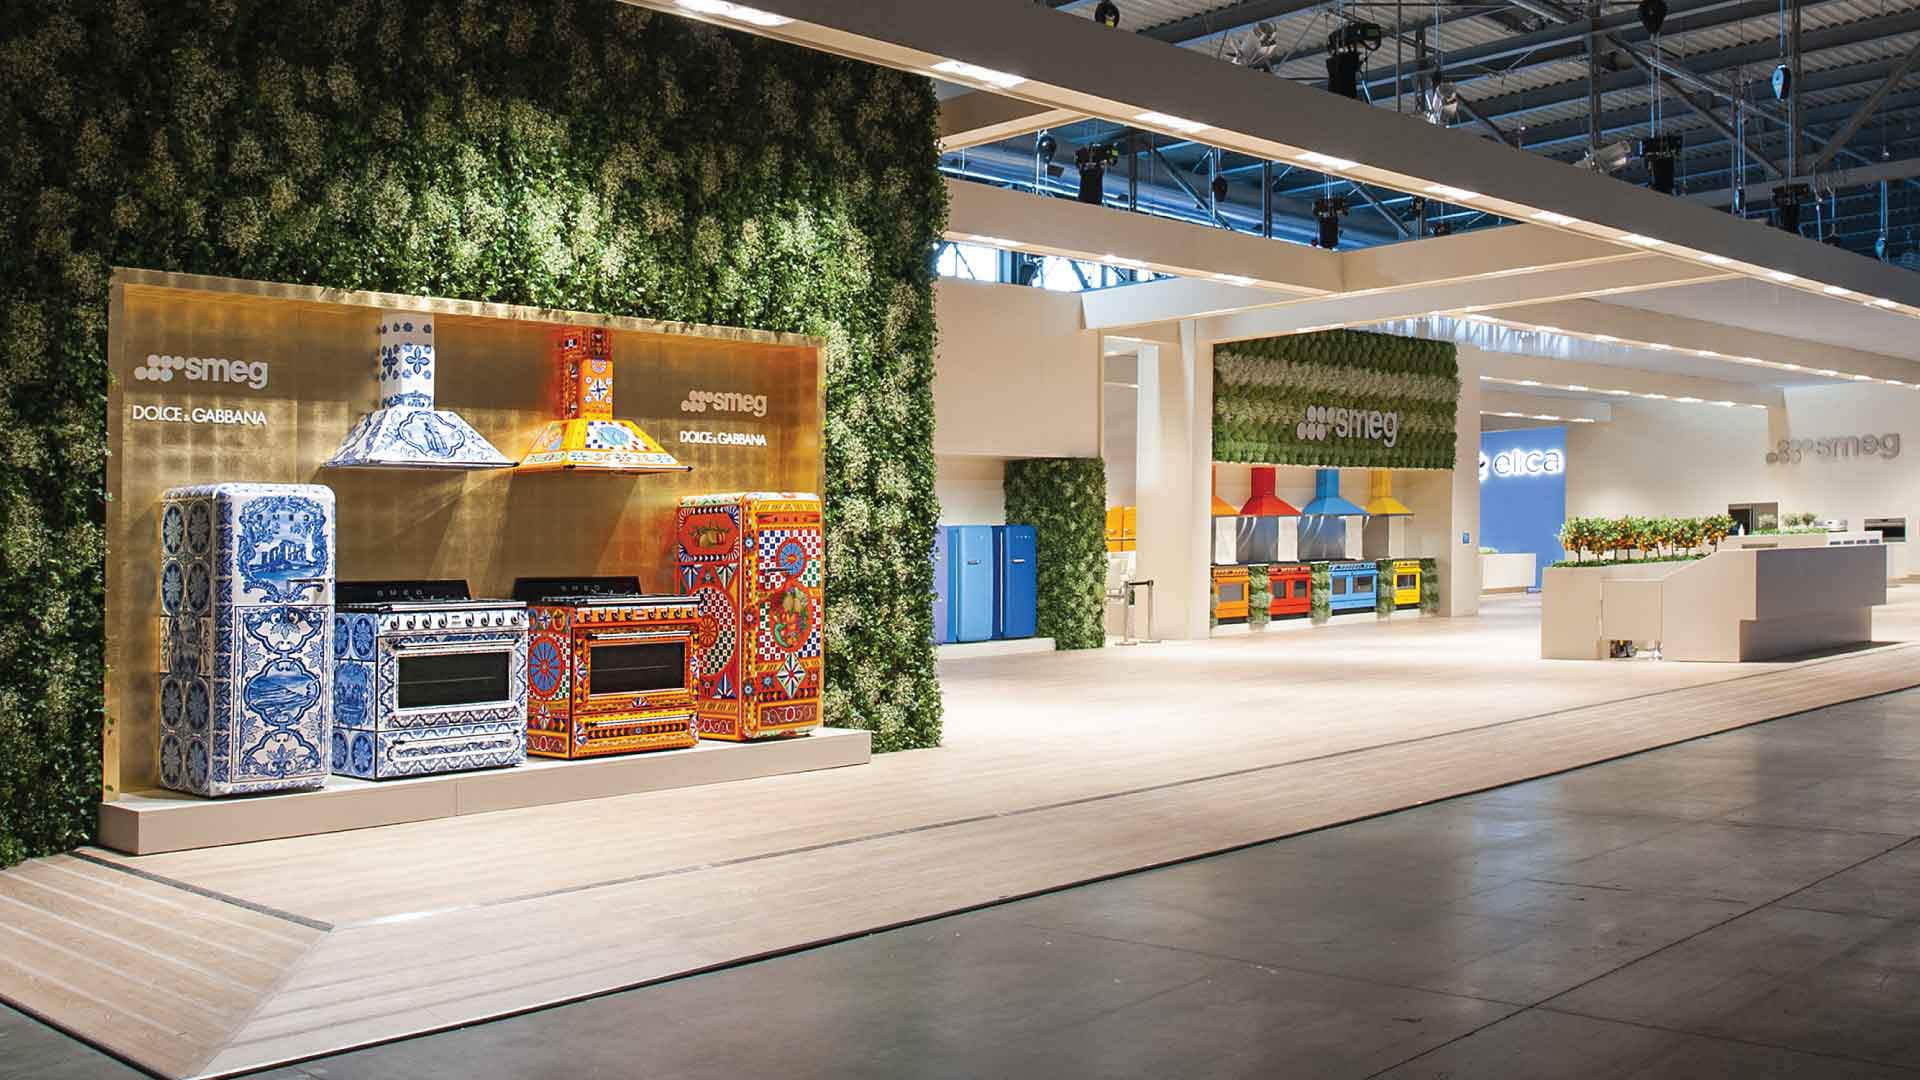 Smeg Unveiled New Products at Eurocucina 2022